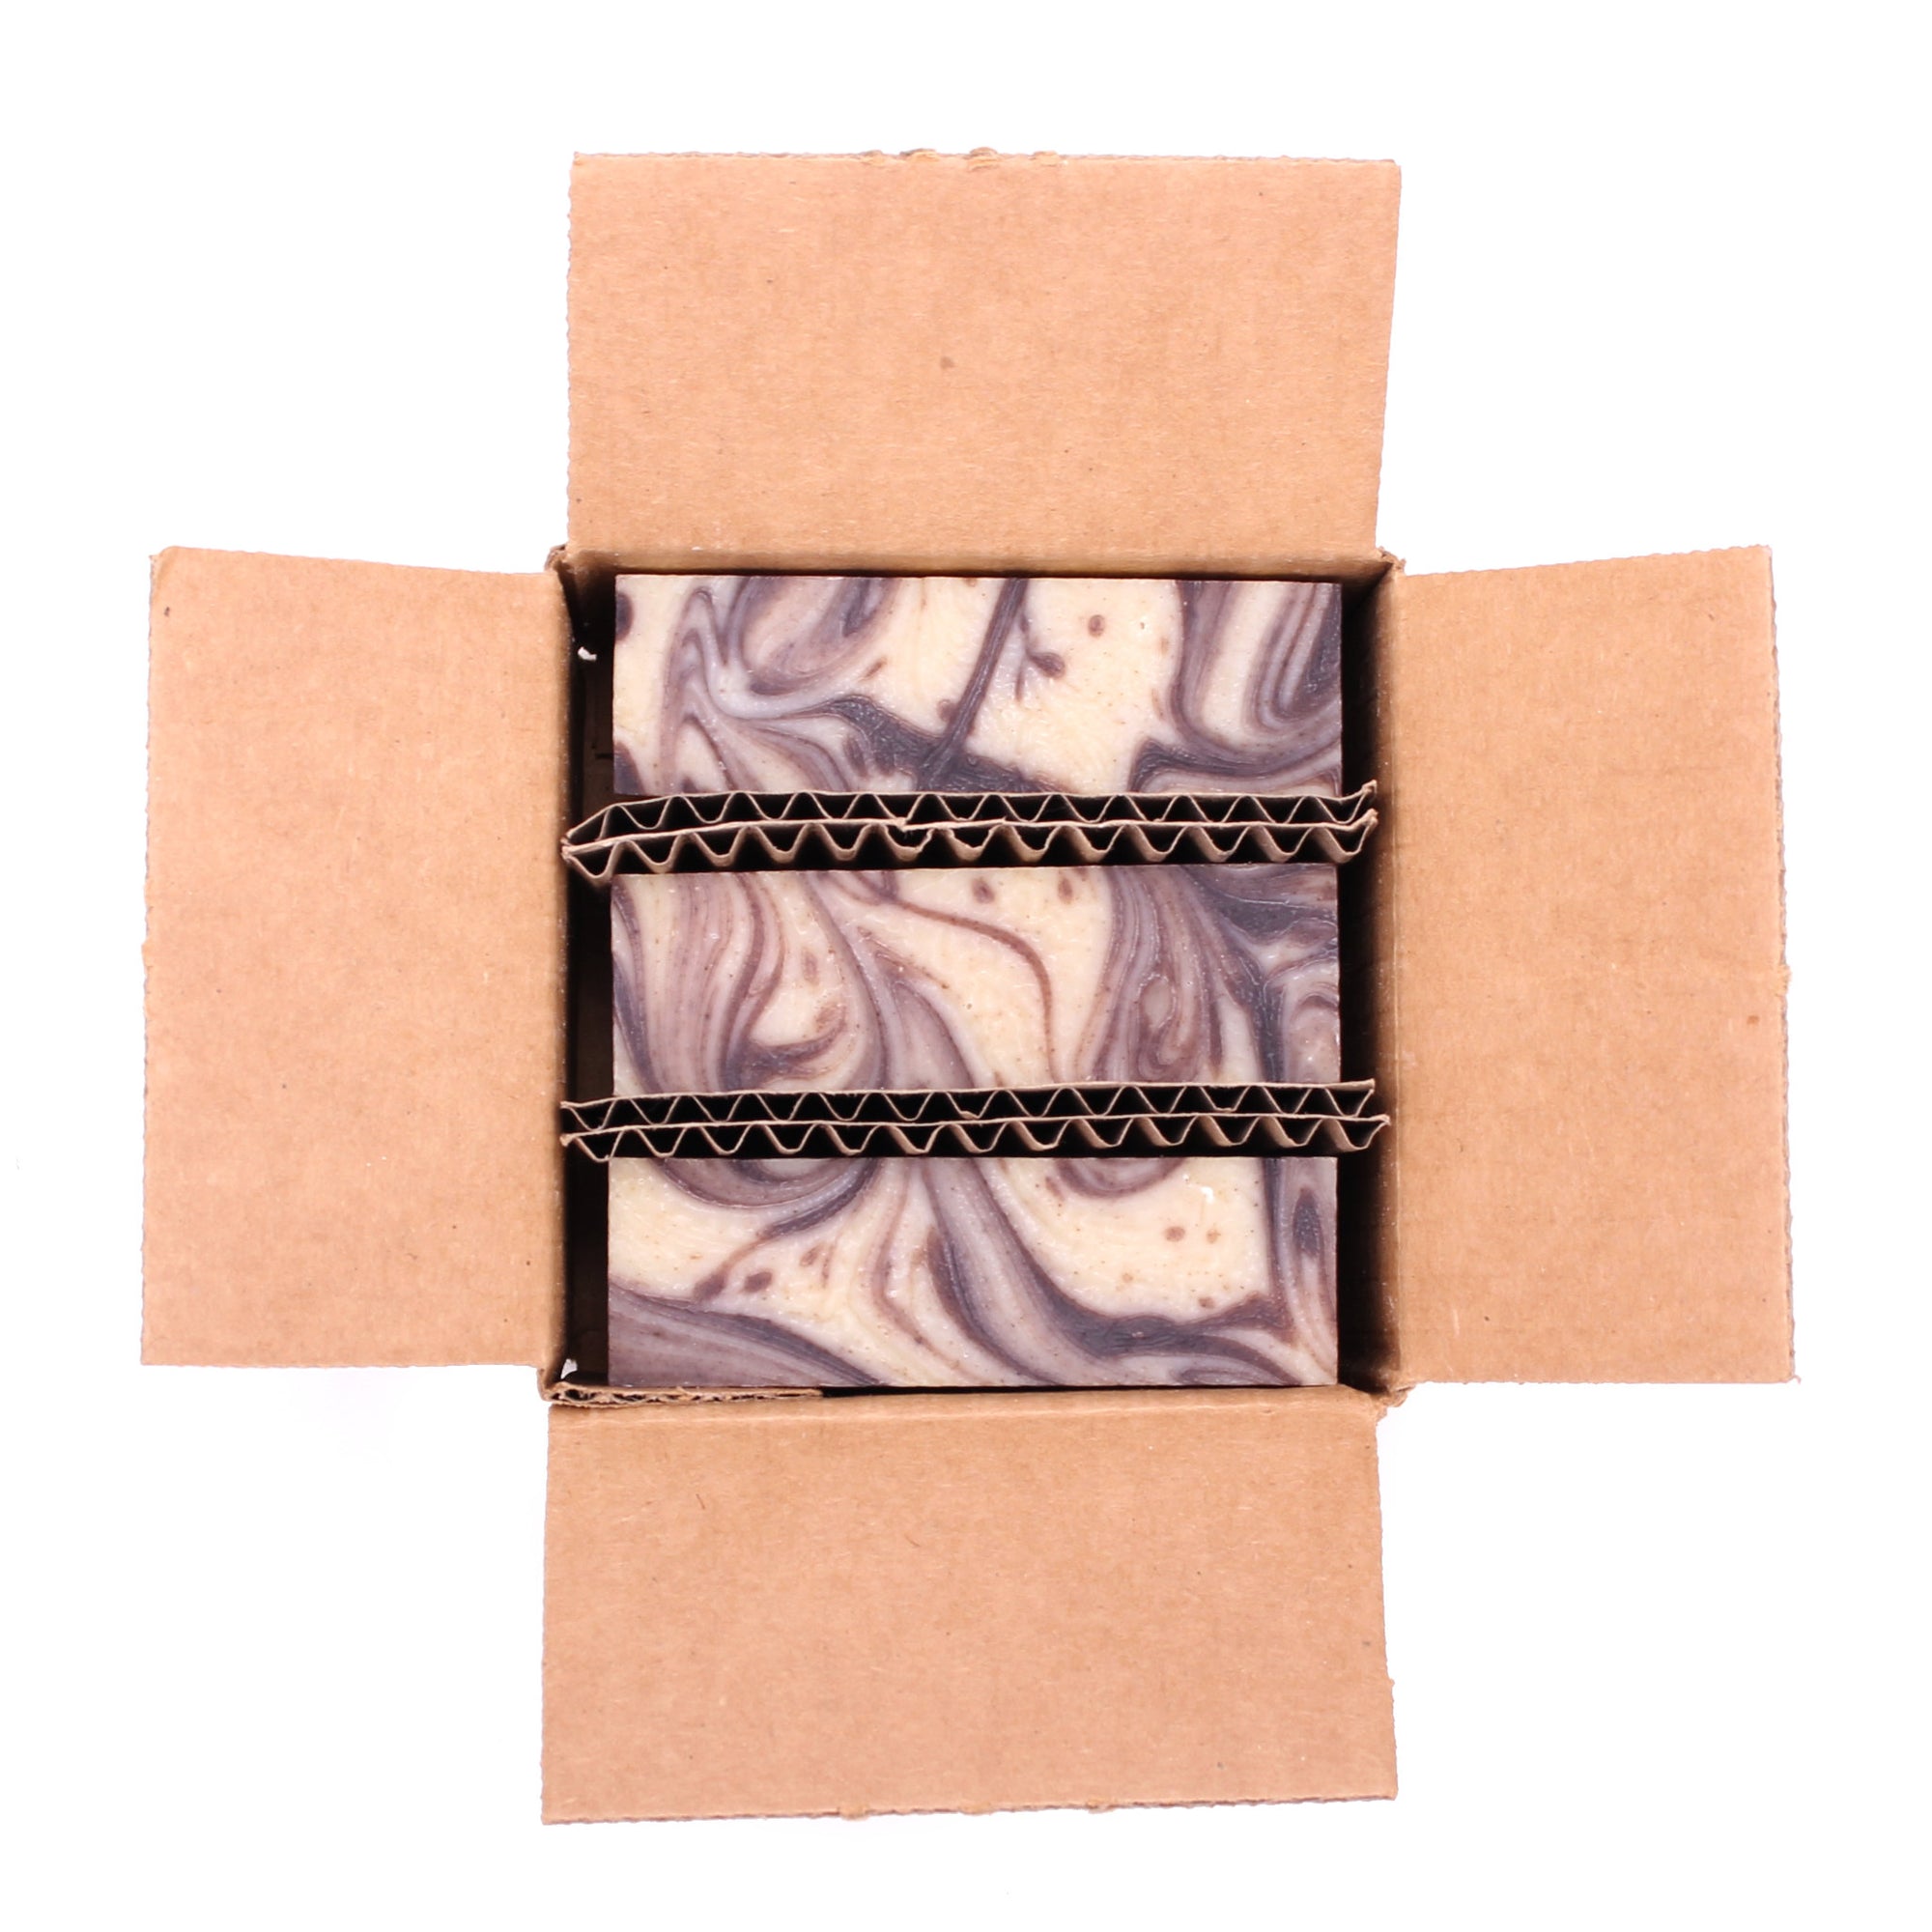 Naked three pack of Boldly Humble star anise essential oil organic bar soap from ground Soap in box.